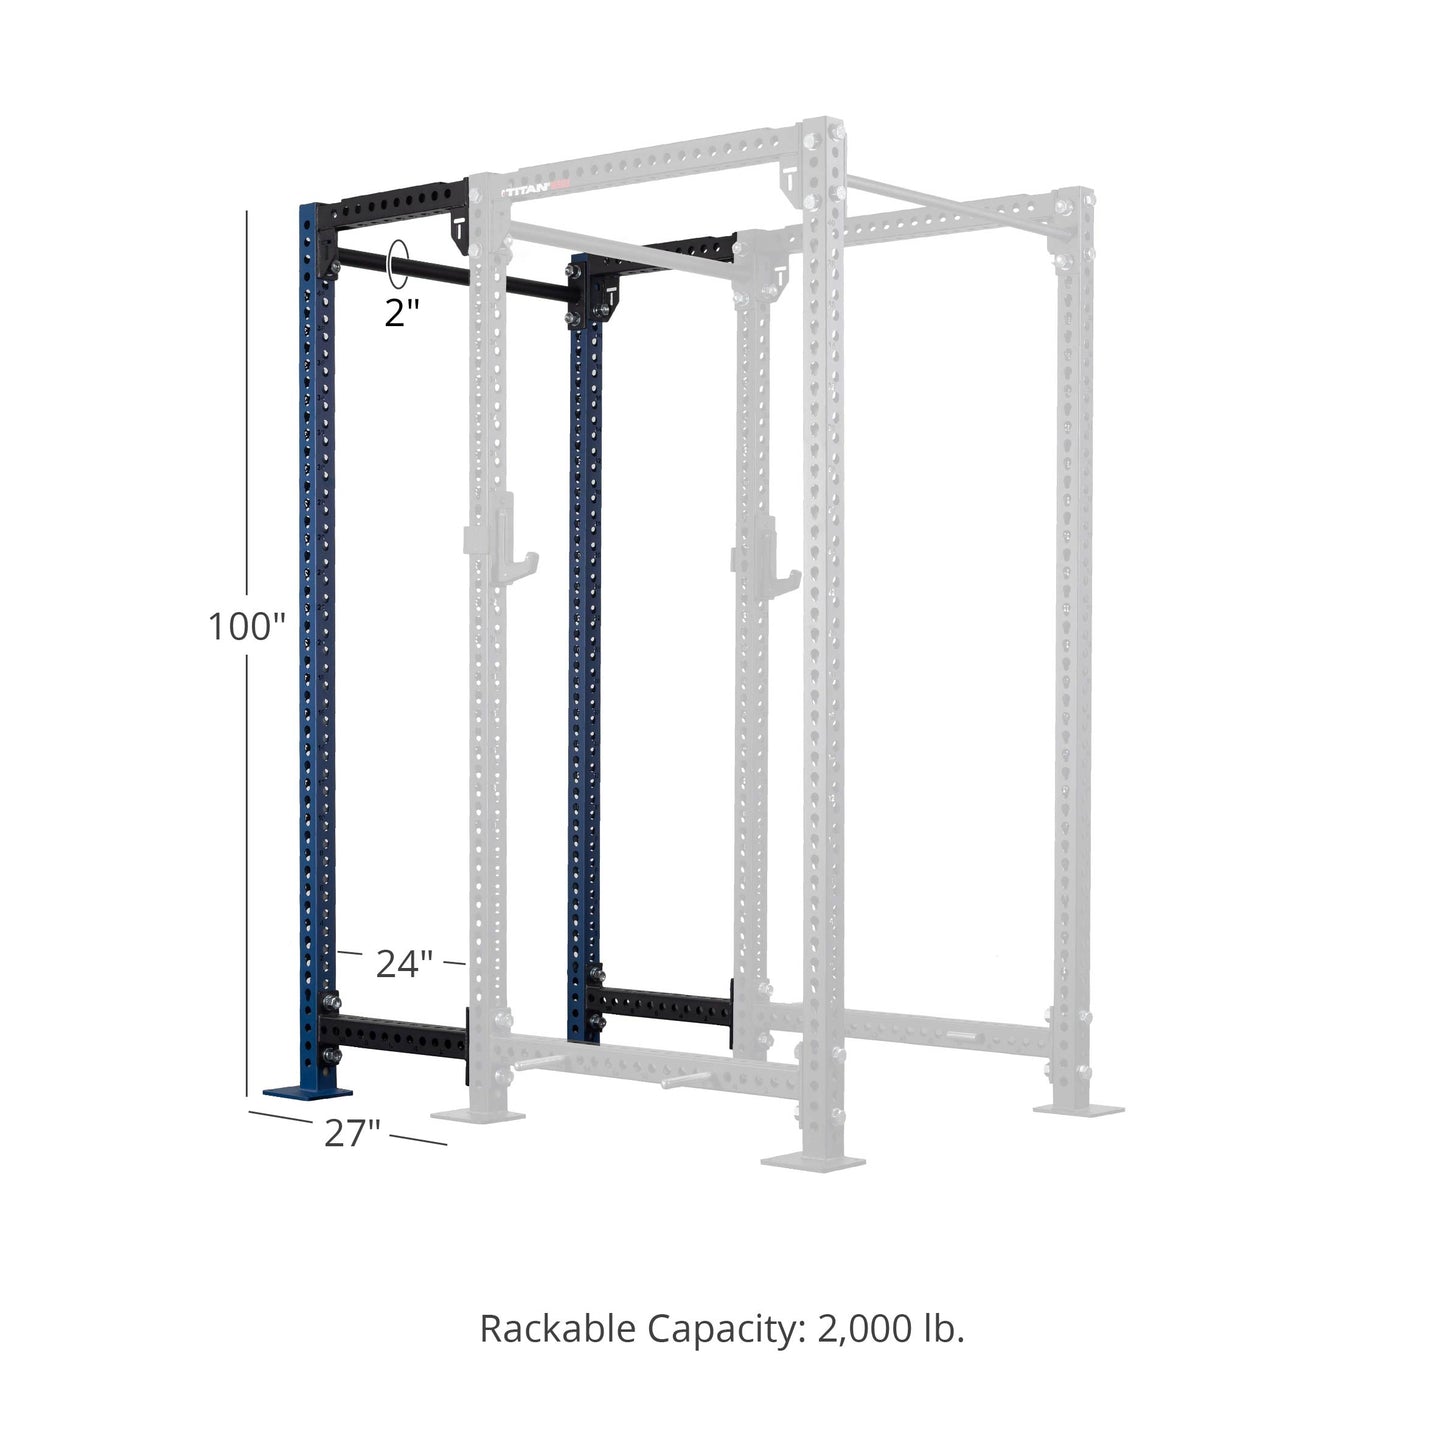 TITAN Series 24" Extension Kit - Extension Color: Navy - Extension Height: 100" - Crossmember: 2" Fat Pull-Up Bar | Navy / 100" / 2" Fat Pull-Up Bar - view 74